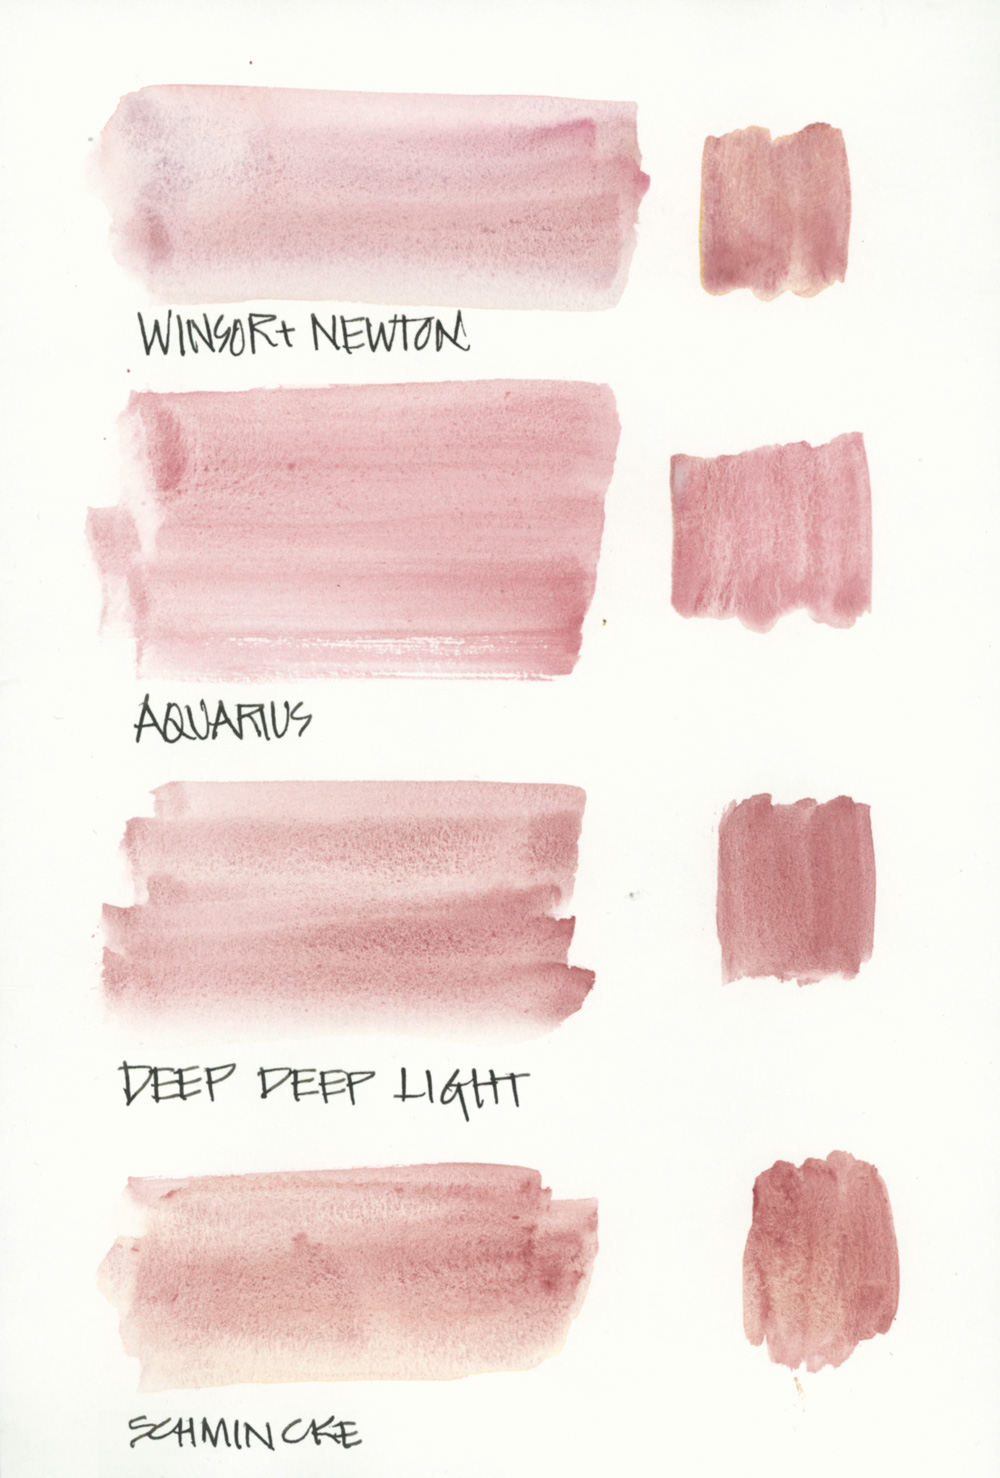 Why Potter's Pink is a Watercolourist's Secret Weapon - Jackson's